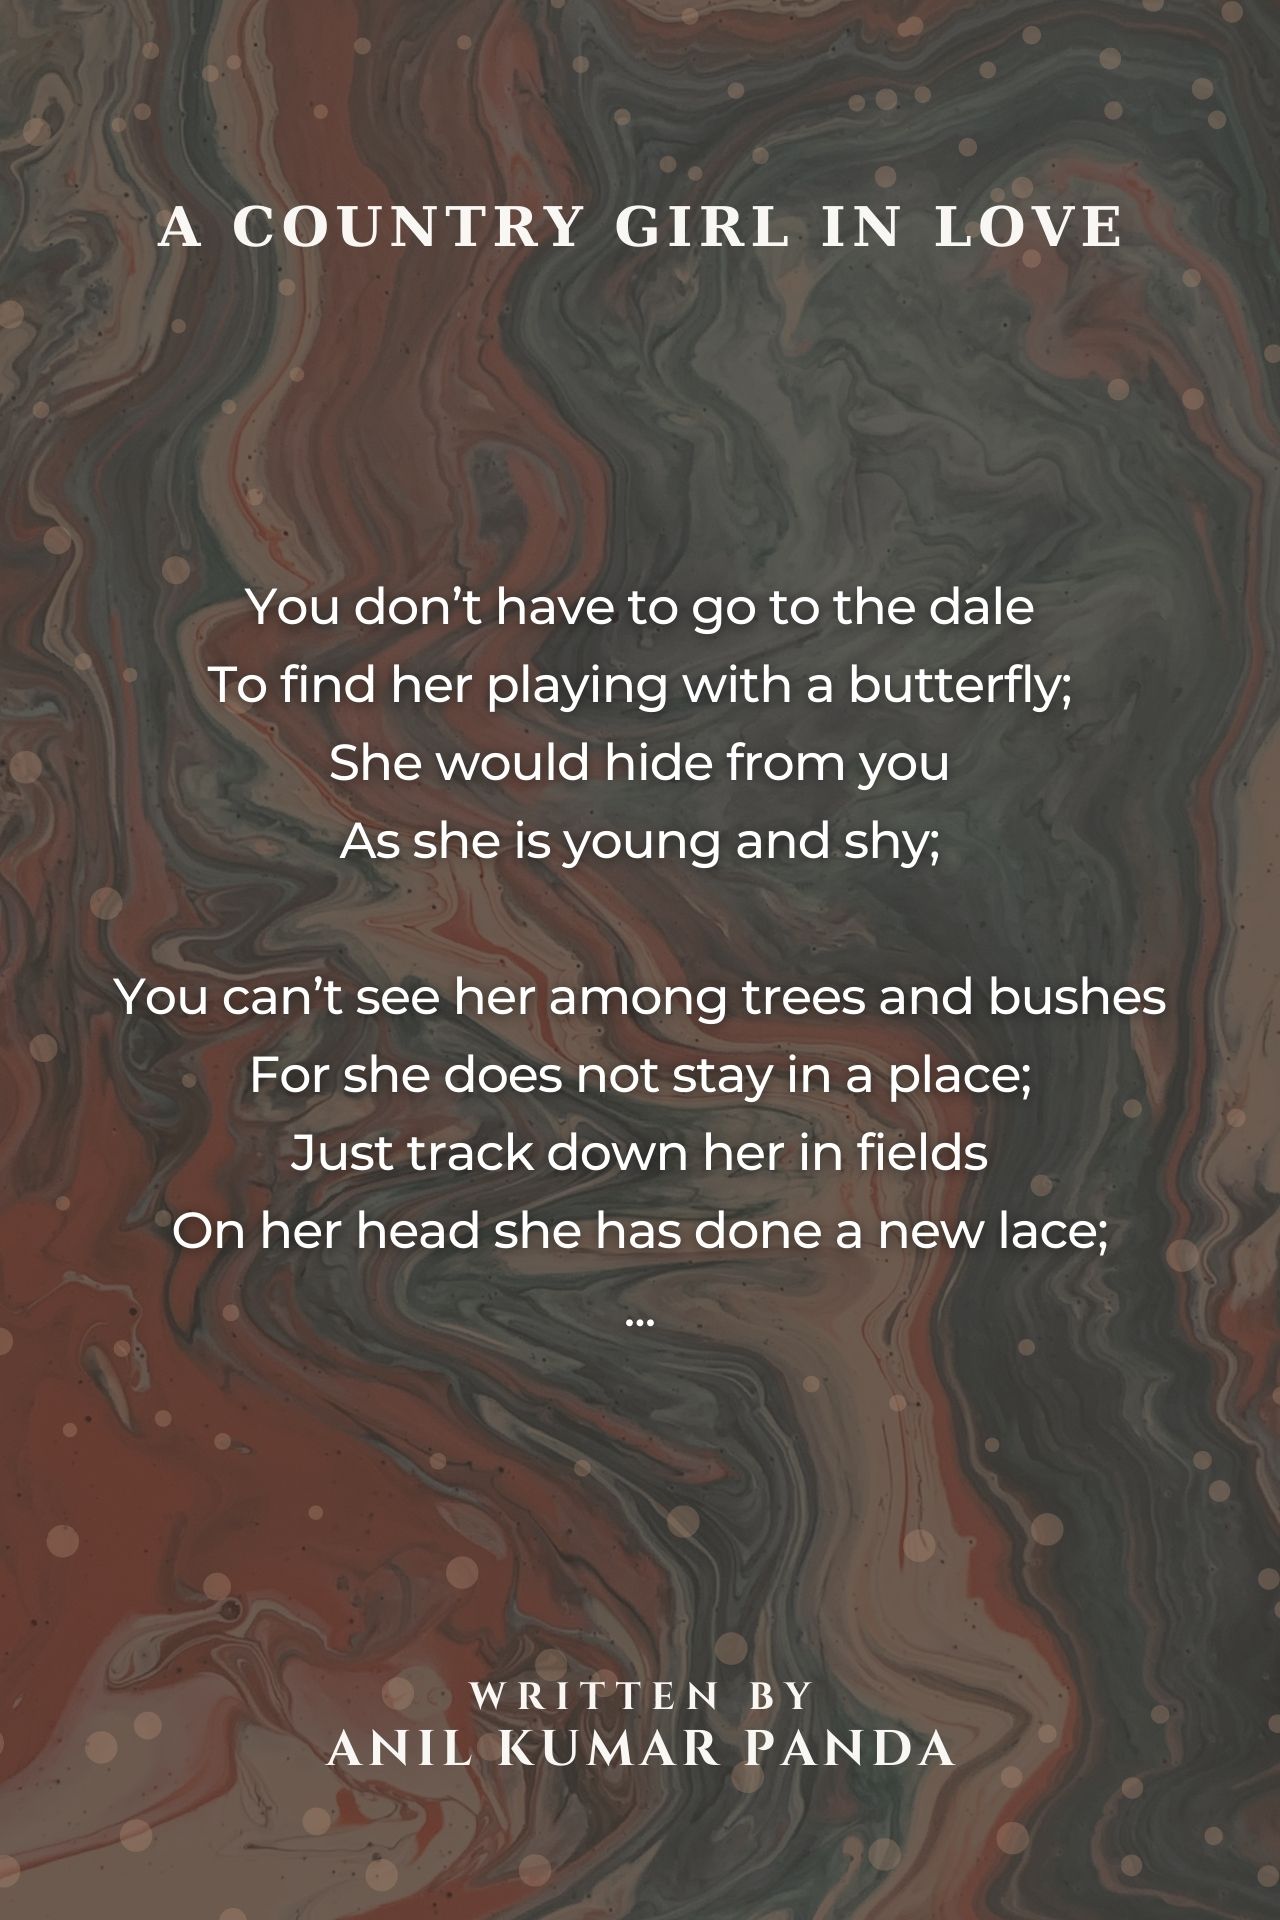 love poems that rhyme for your girlfriend